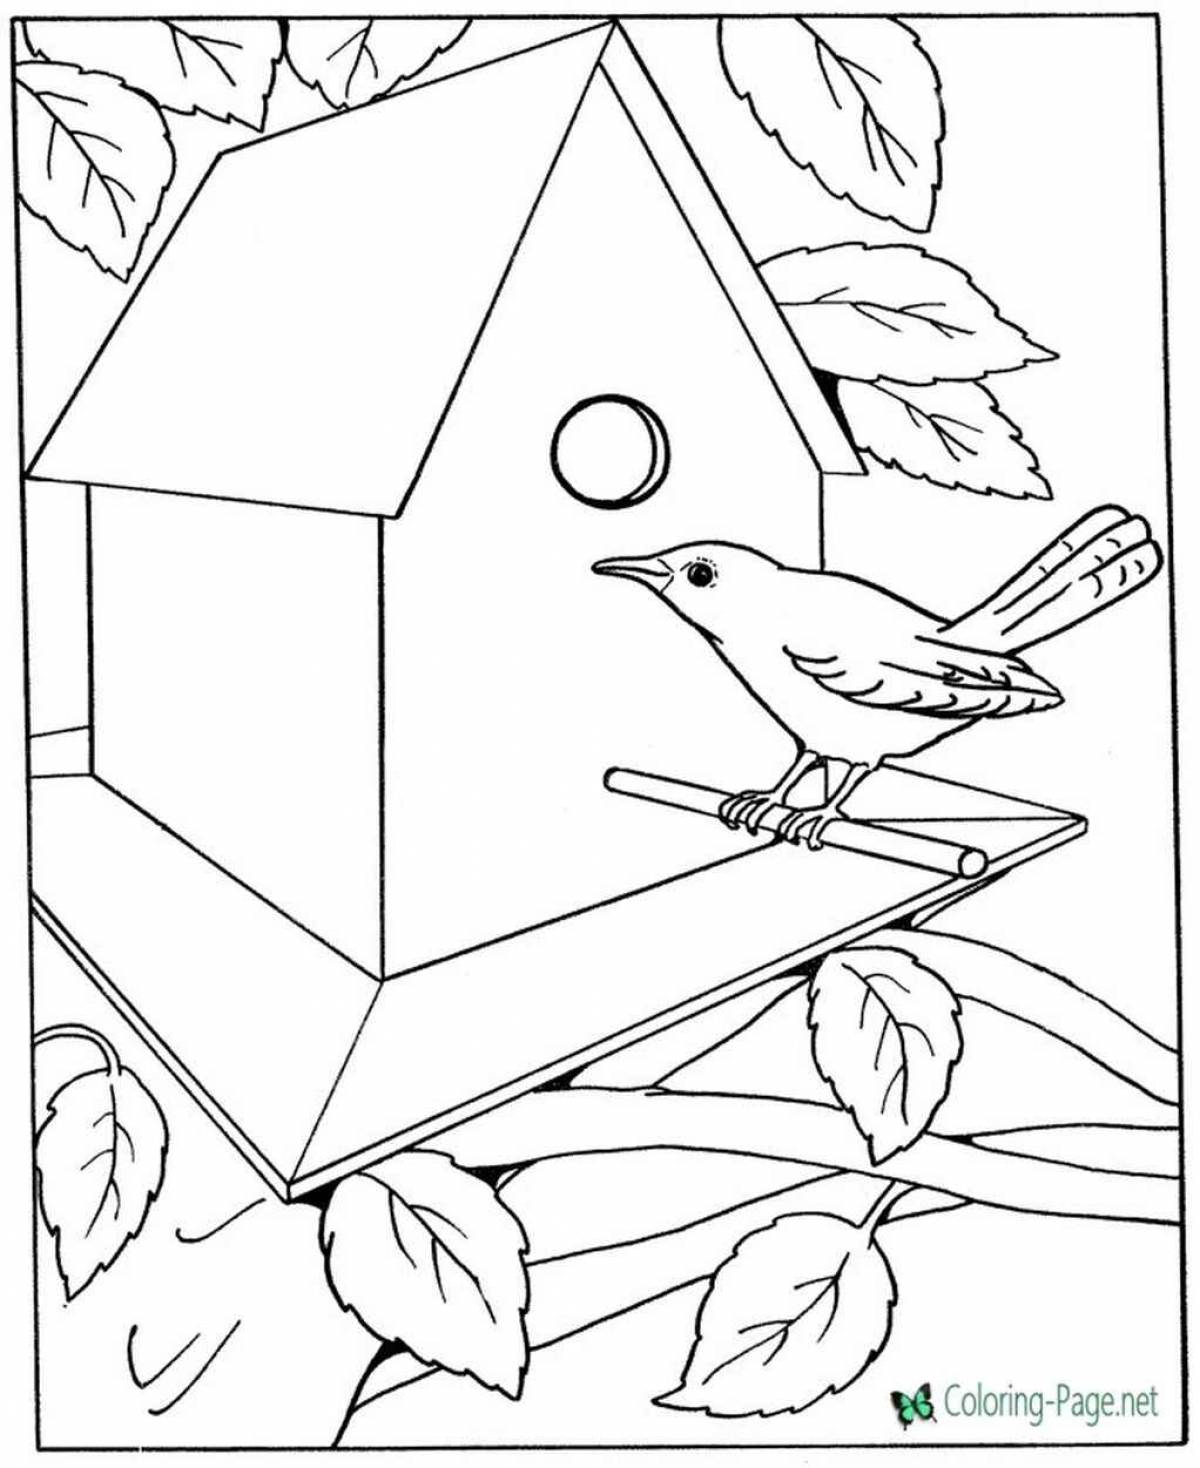 Brave starling coloring book for kids